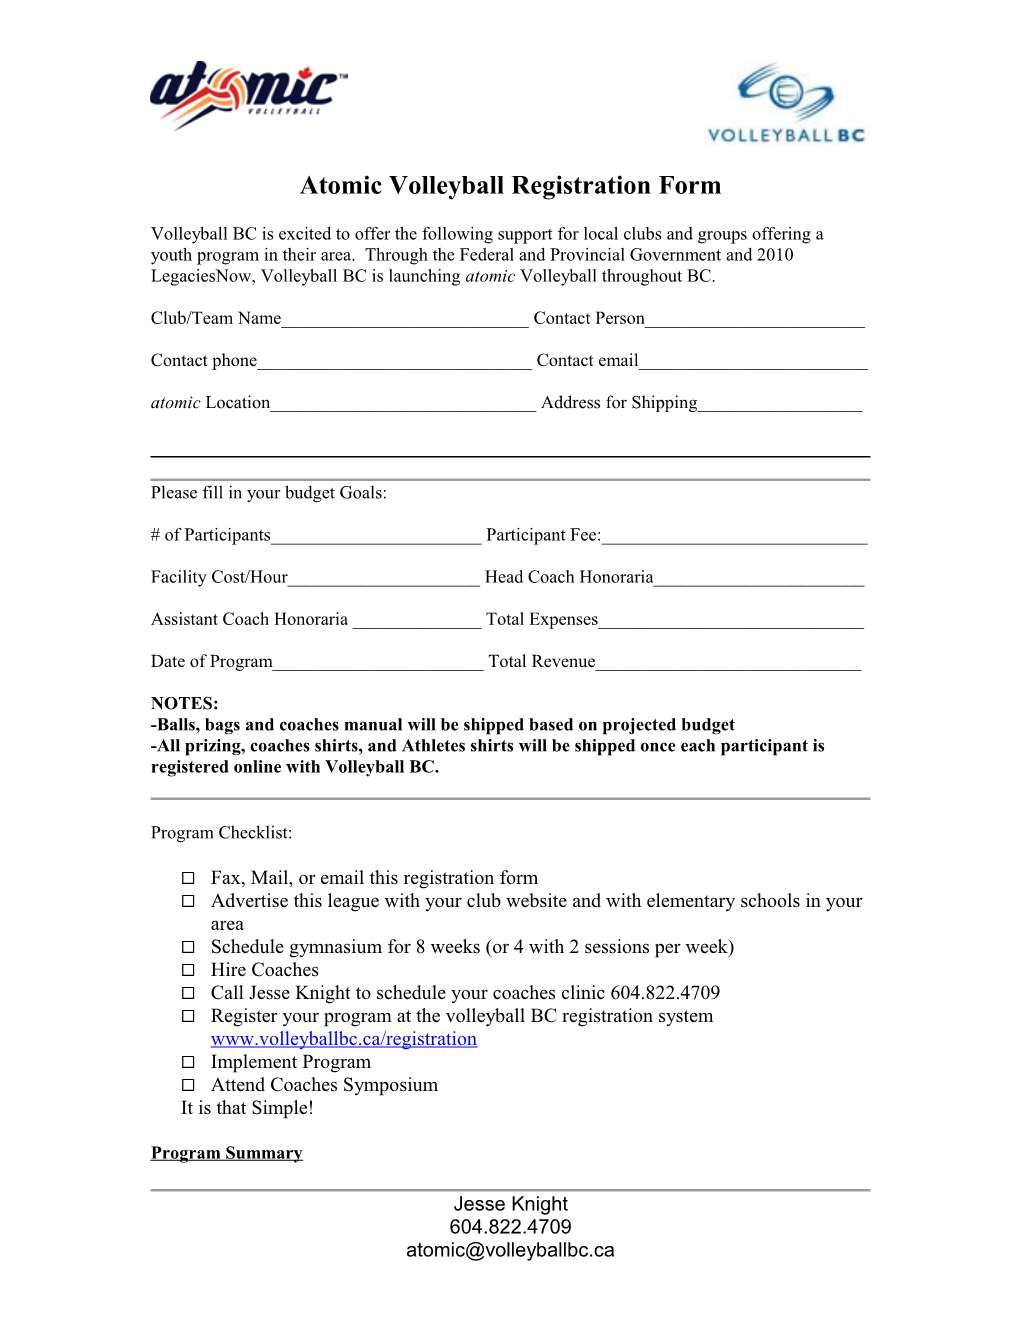 Atomic Volleyball Registration Form